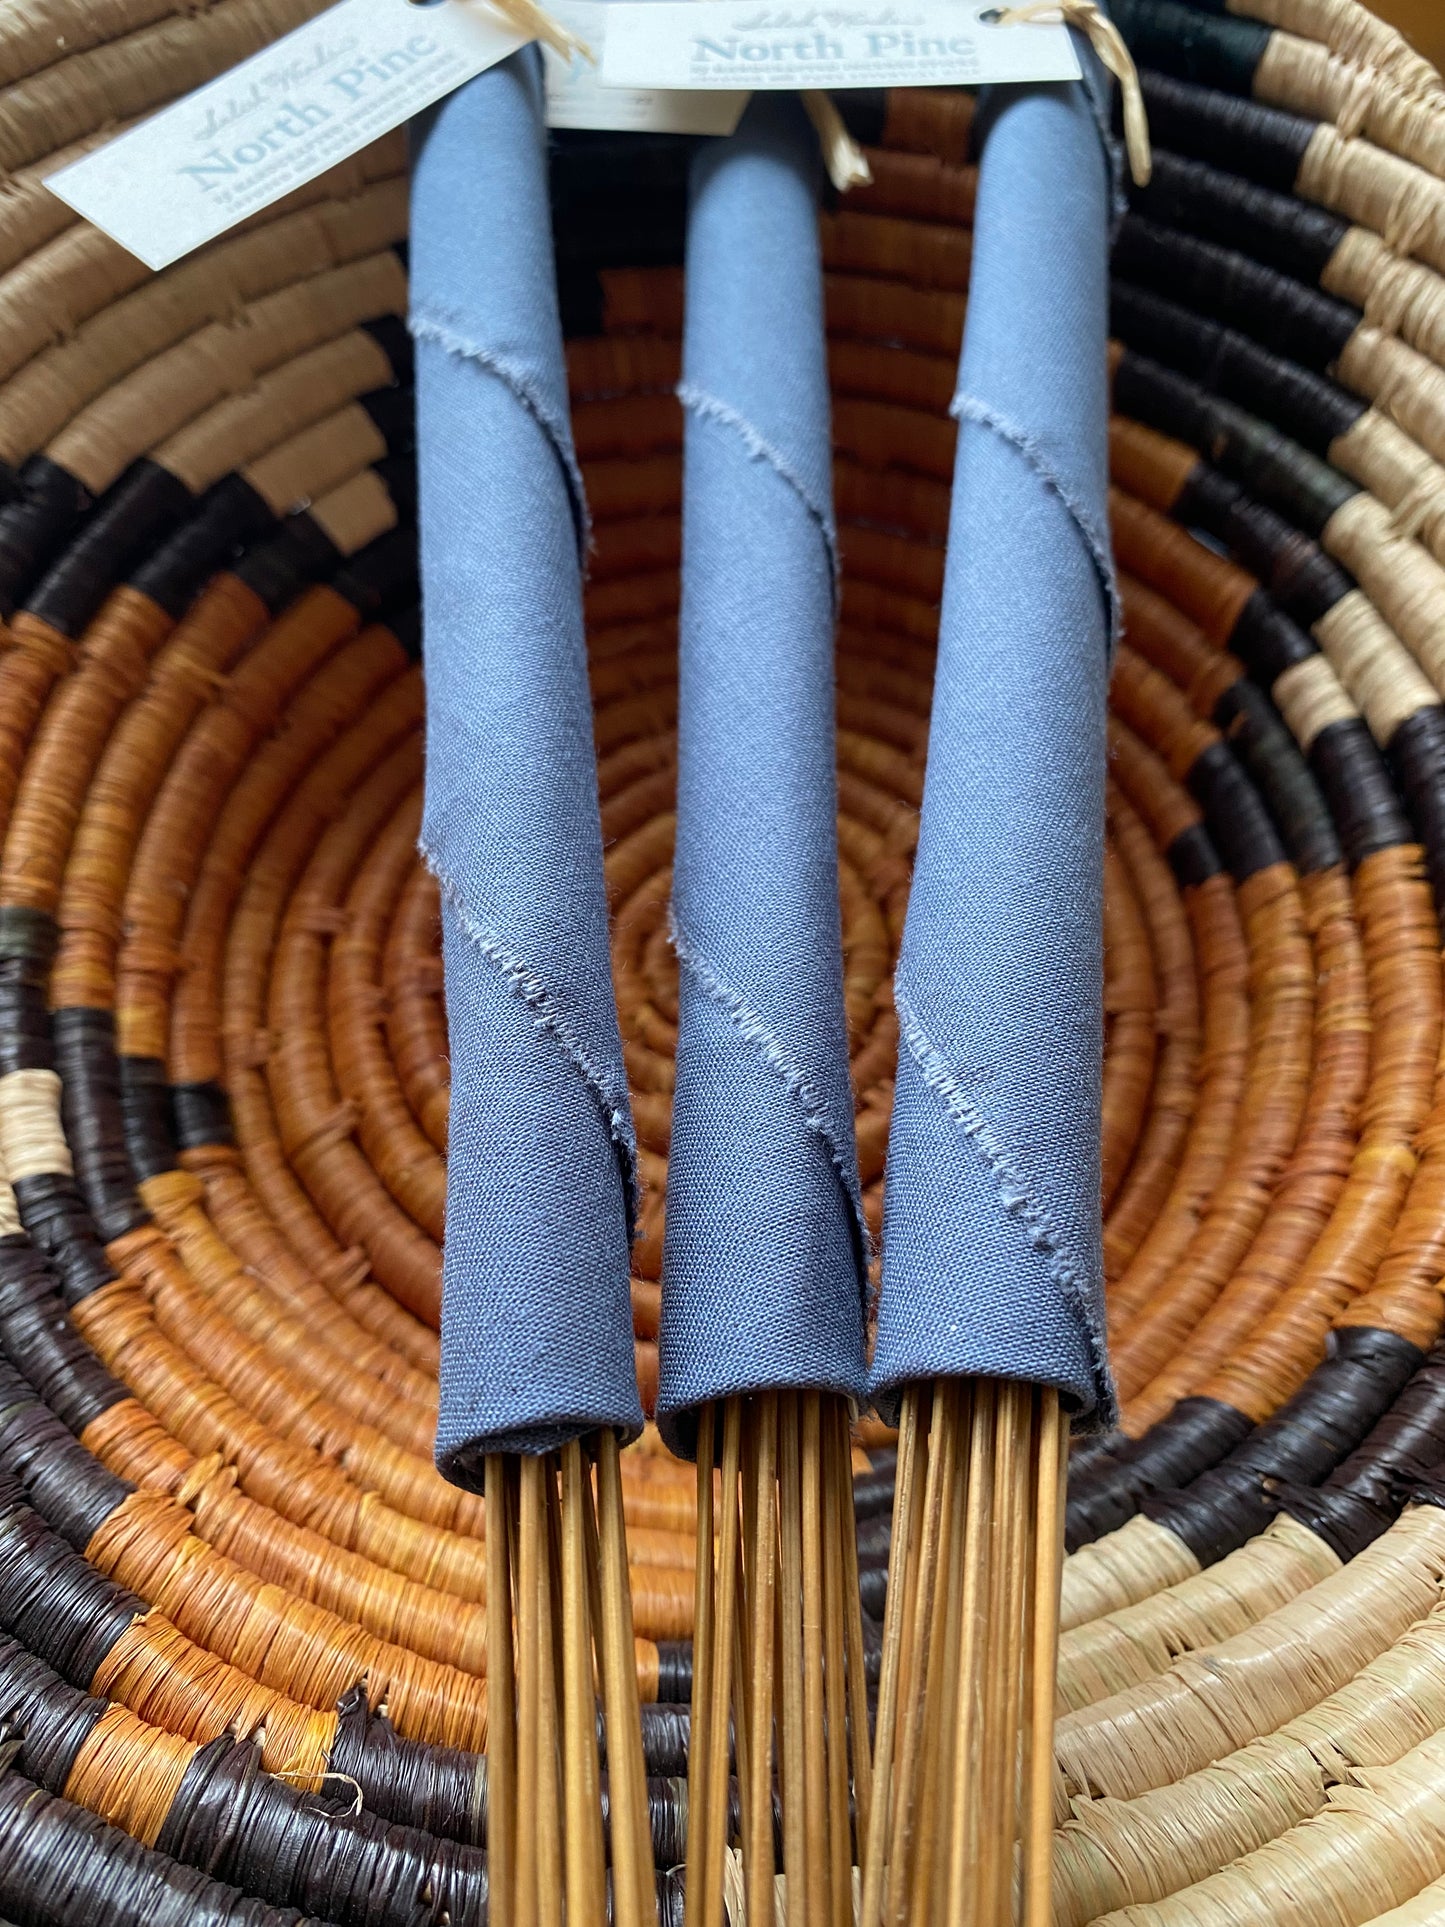 Salish Winds Local PNW Incense- North Pine - Moon Room Shop and Wellness